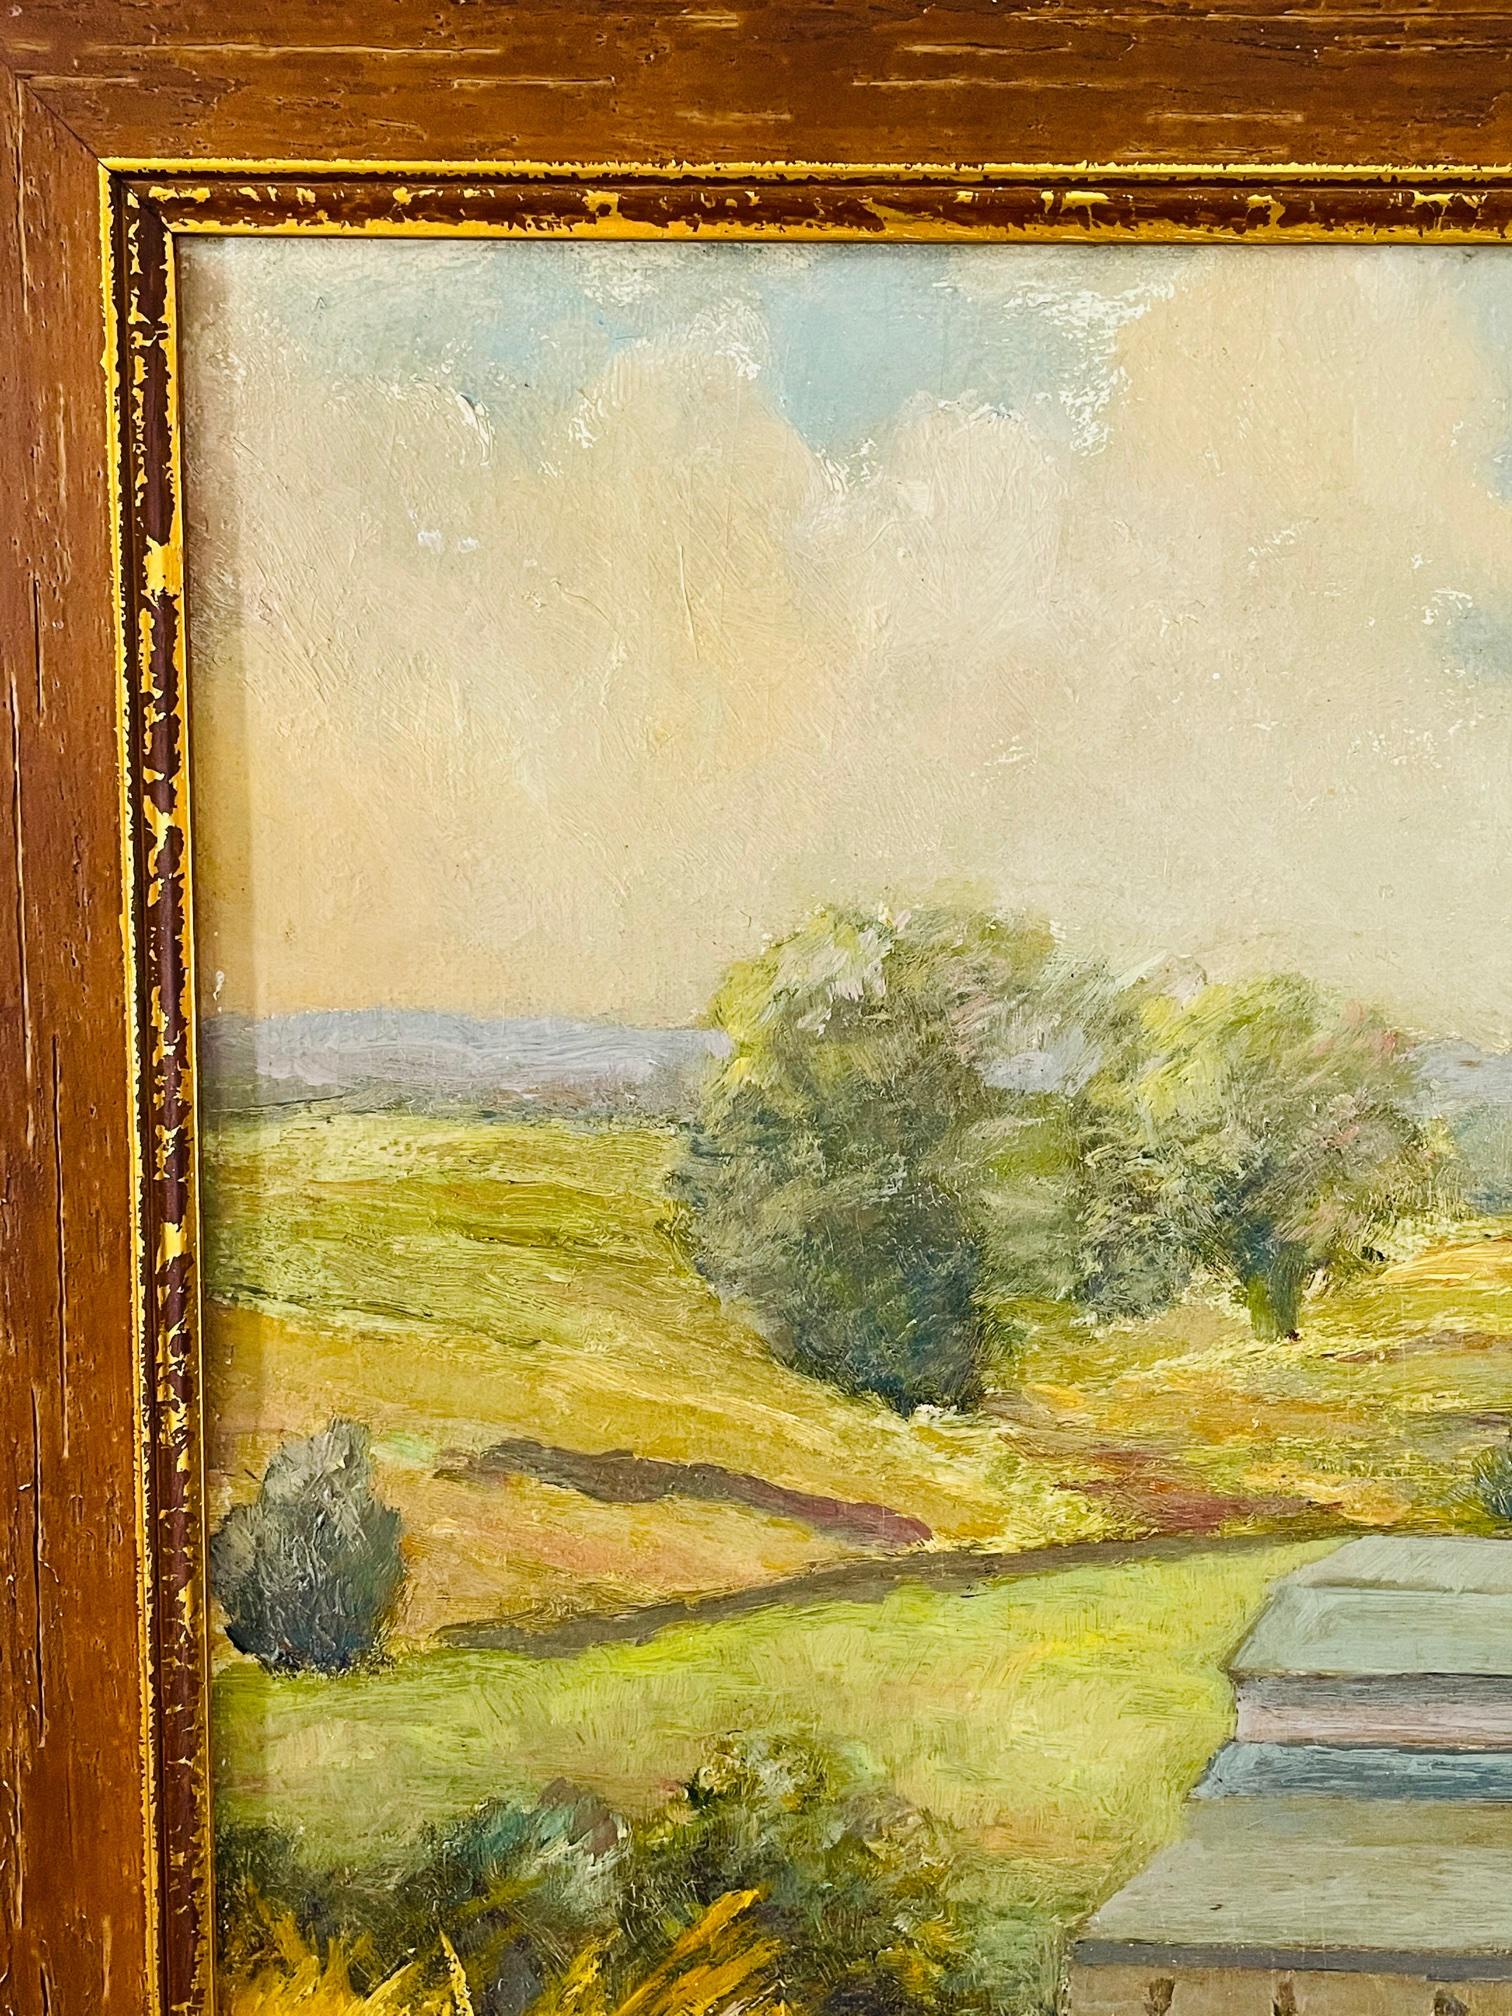 American Landscape Oil on Board Painting Signed O.Erickson